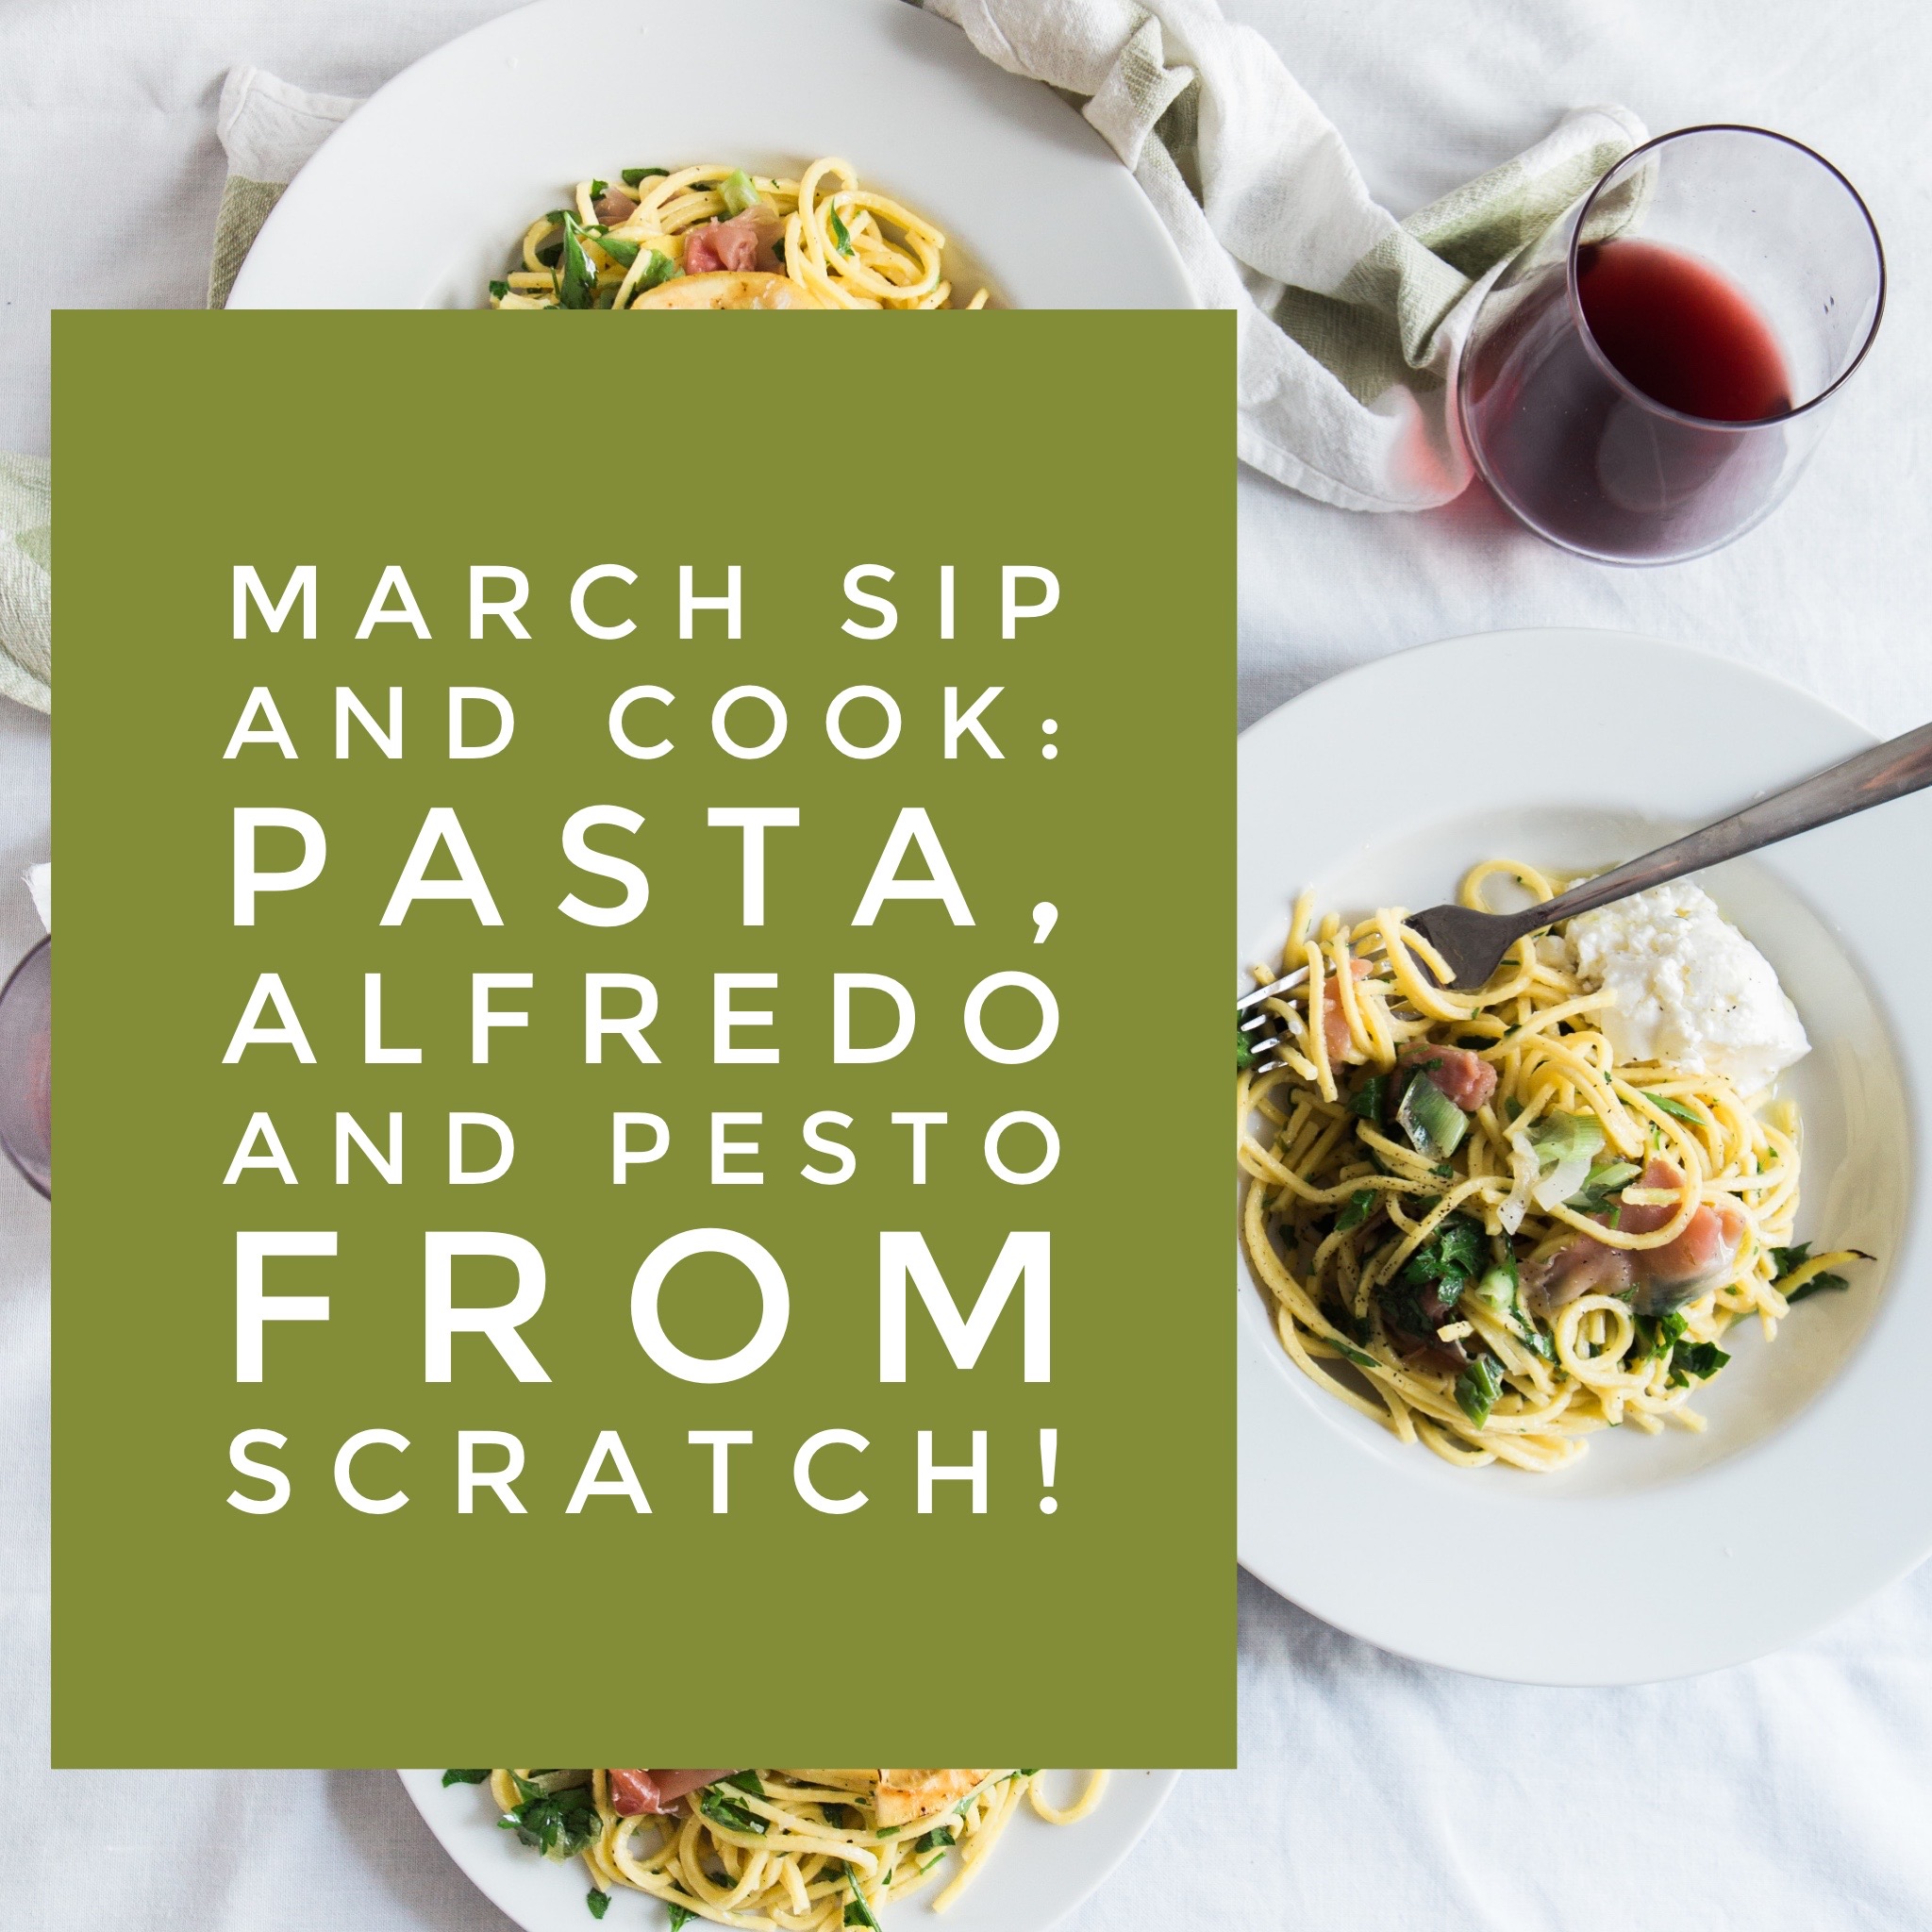 March Sip and Cook: Pasta Alfredo and Pesto from Scratch